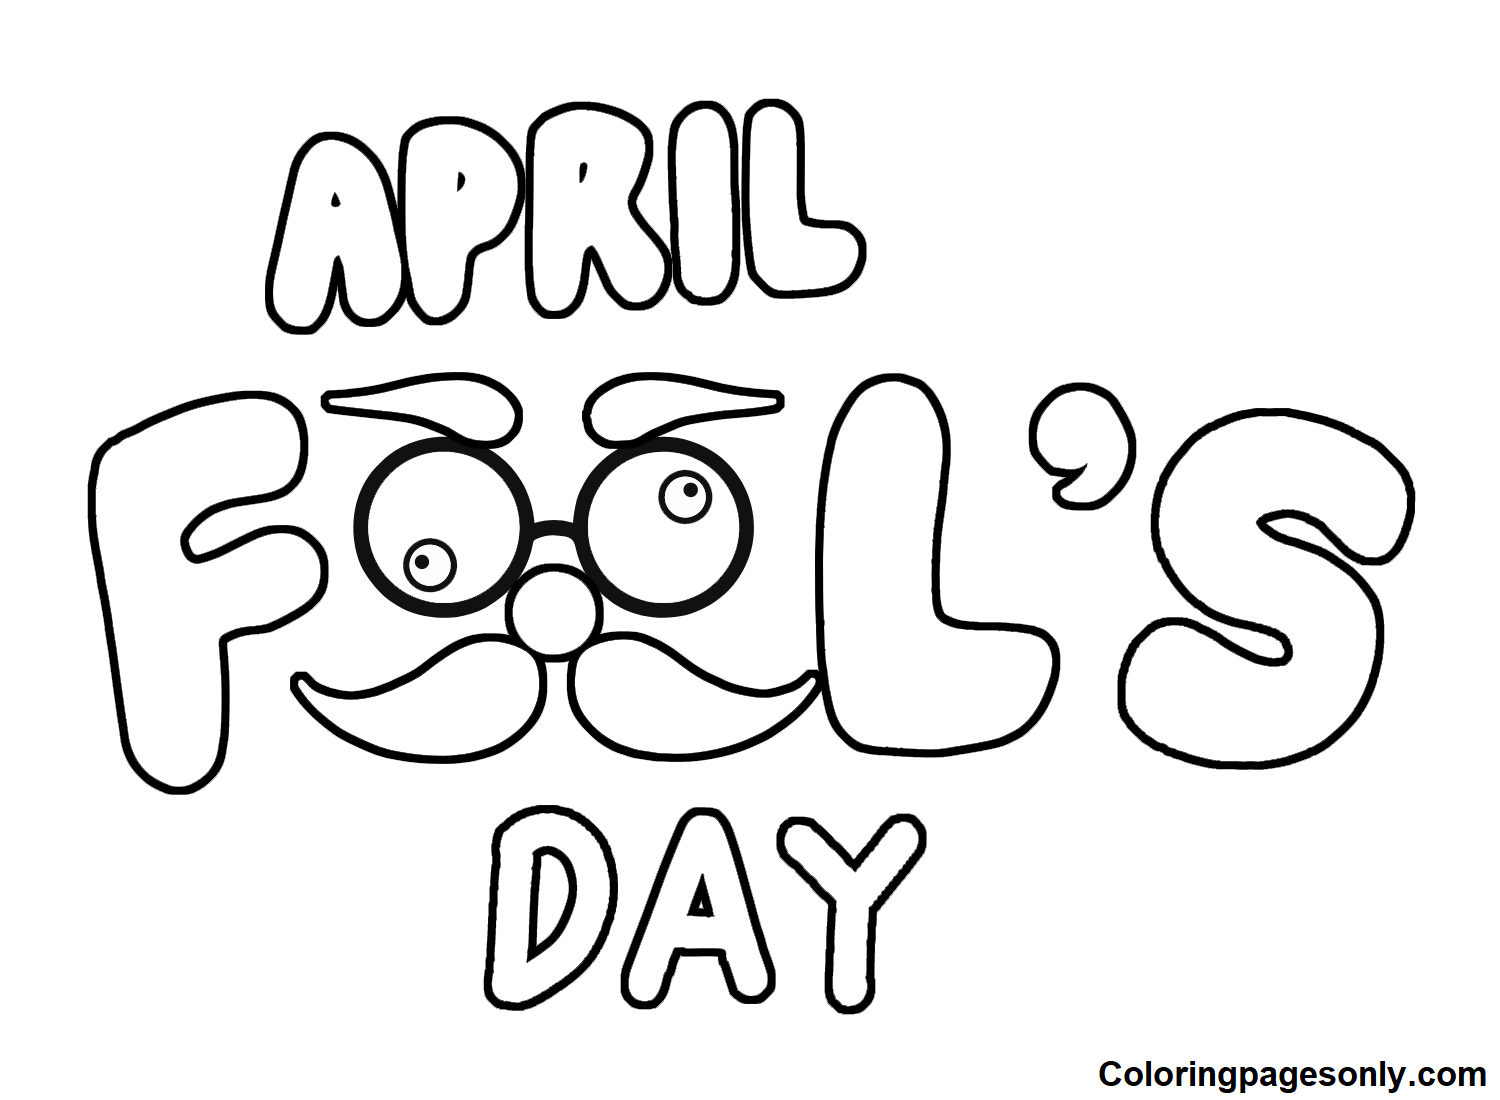 April Fools’ Day Printable Sheets Coloring Pages